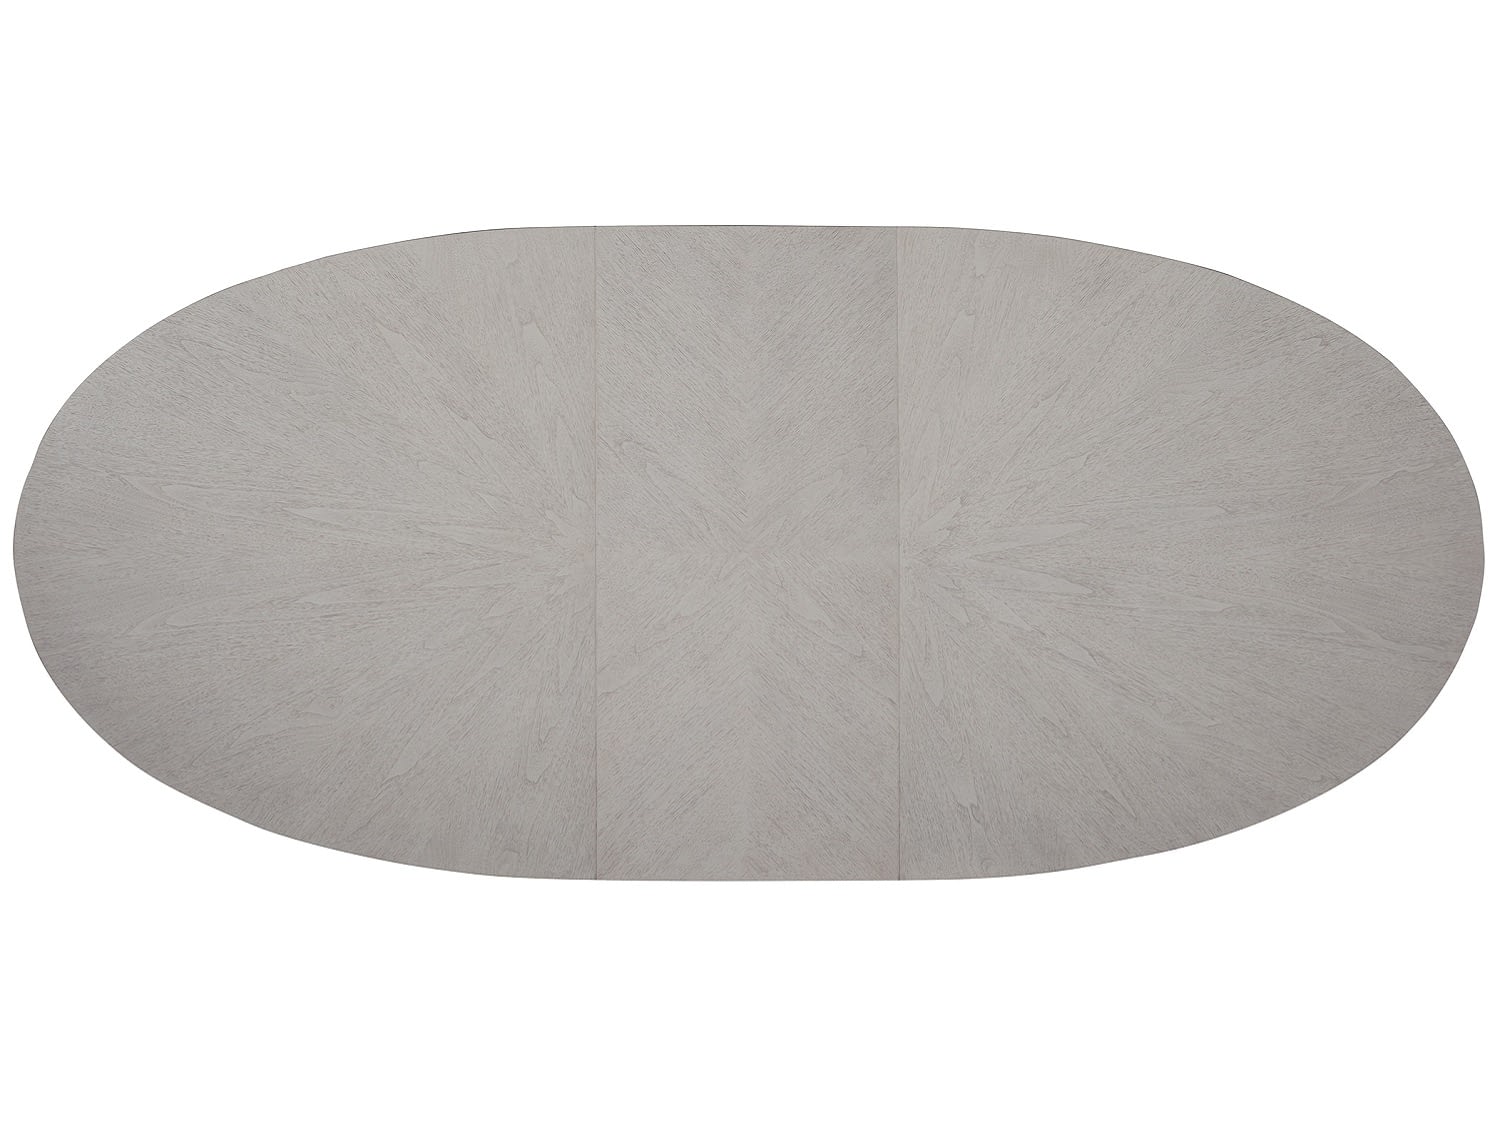 NYOMI Dining Table - Top View